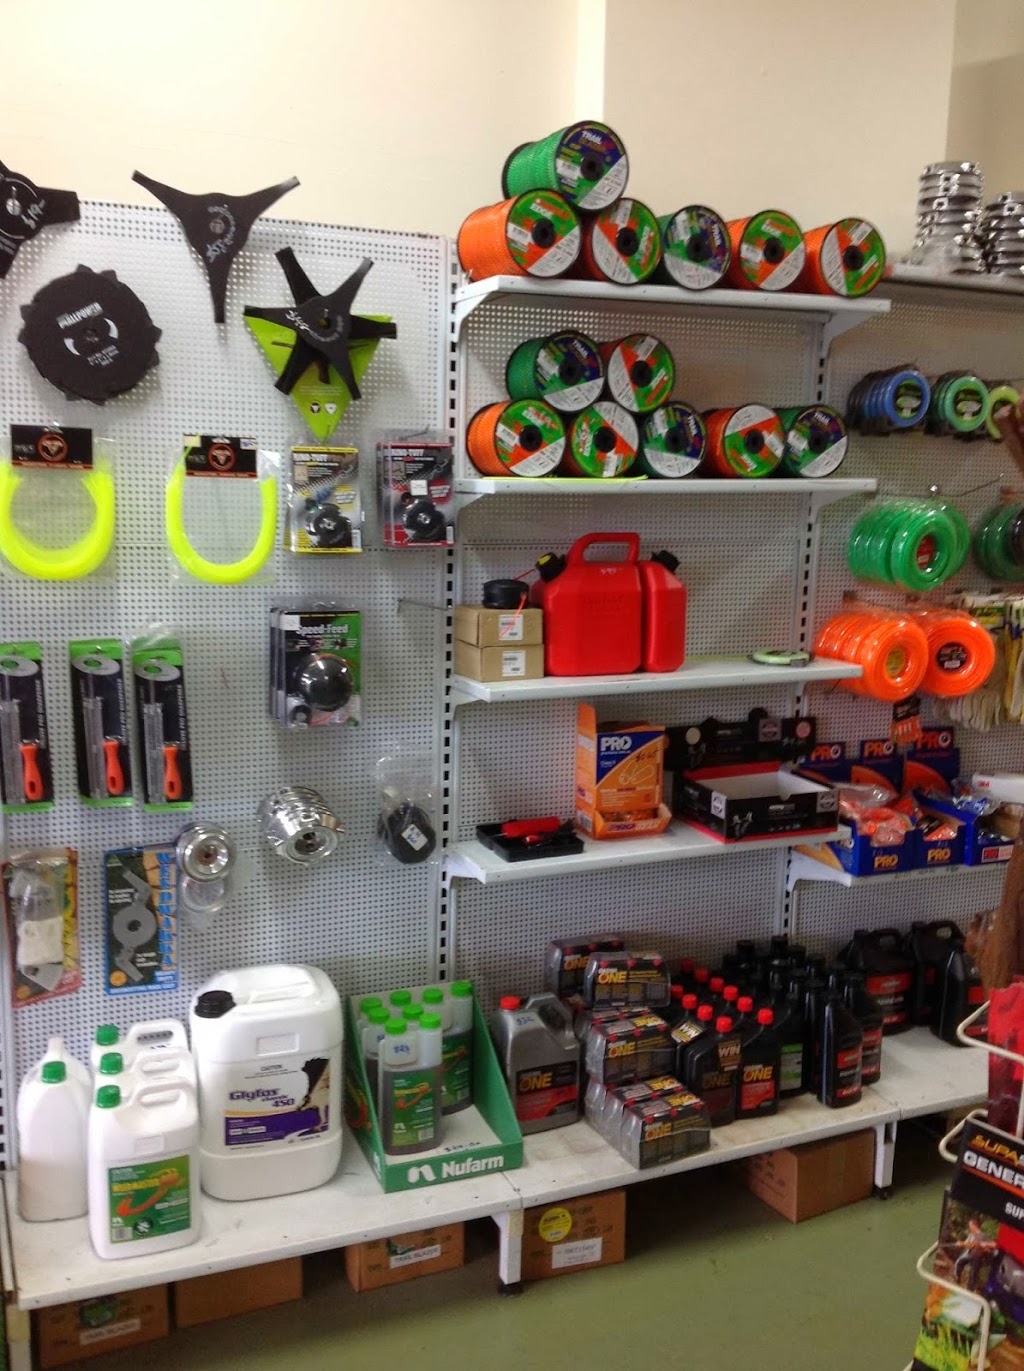 Pick Me Up Mowers | store | 44 Forest Rd, Ferntree Gully VIC 3156, Australia | 0397581367 OR +61 3 9758 1367